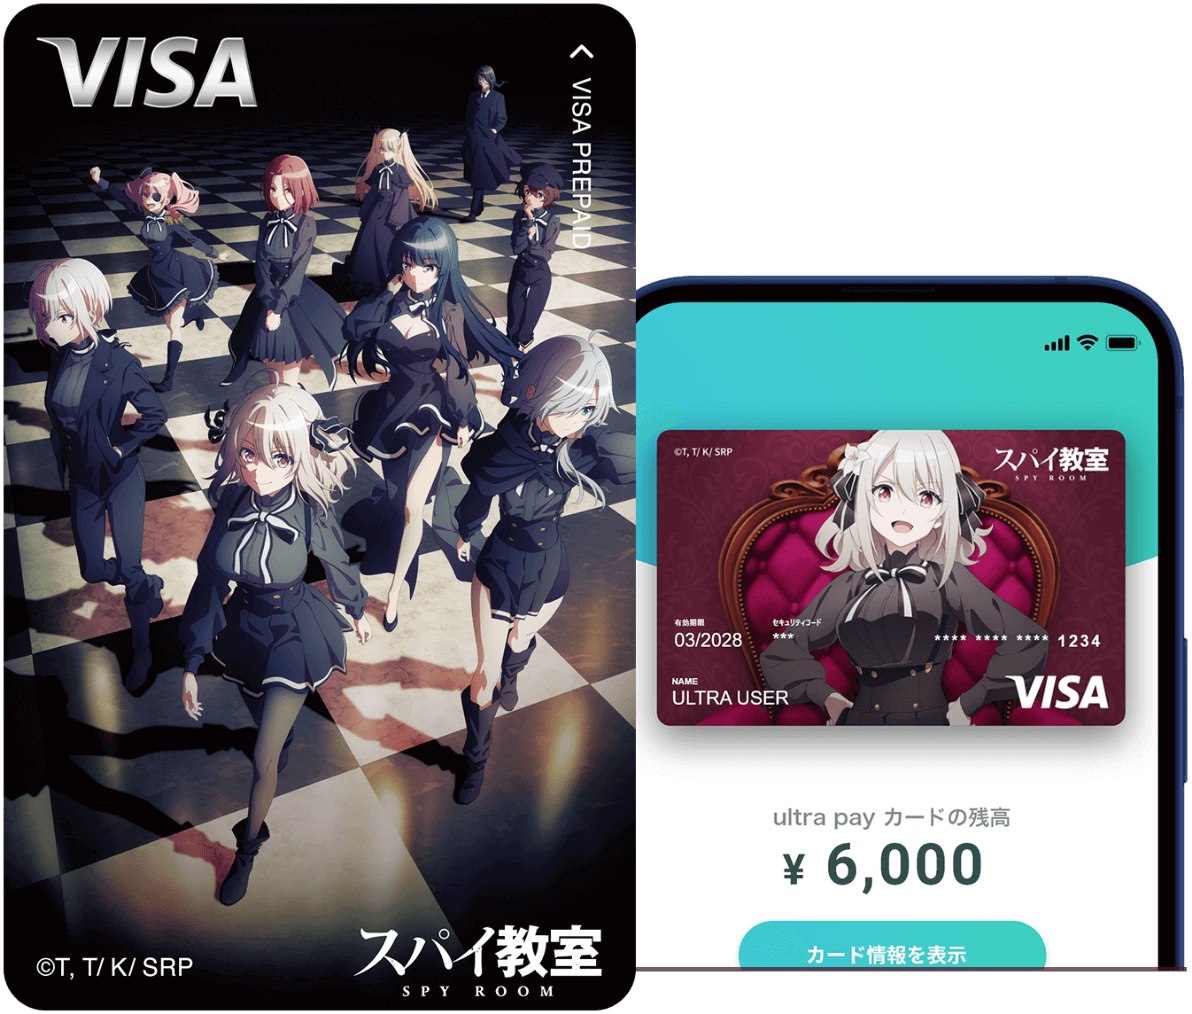 ultra pay カード